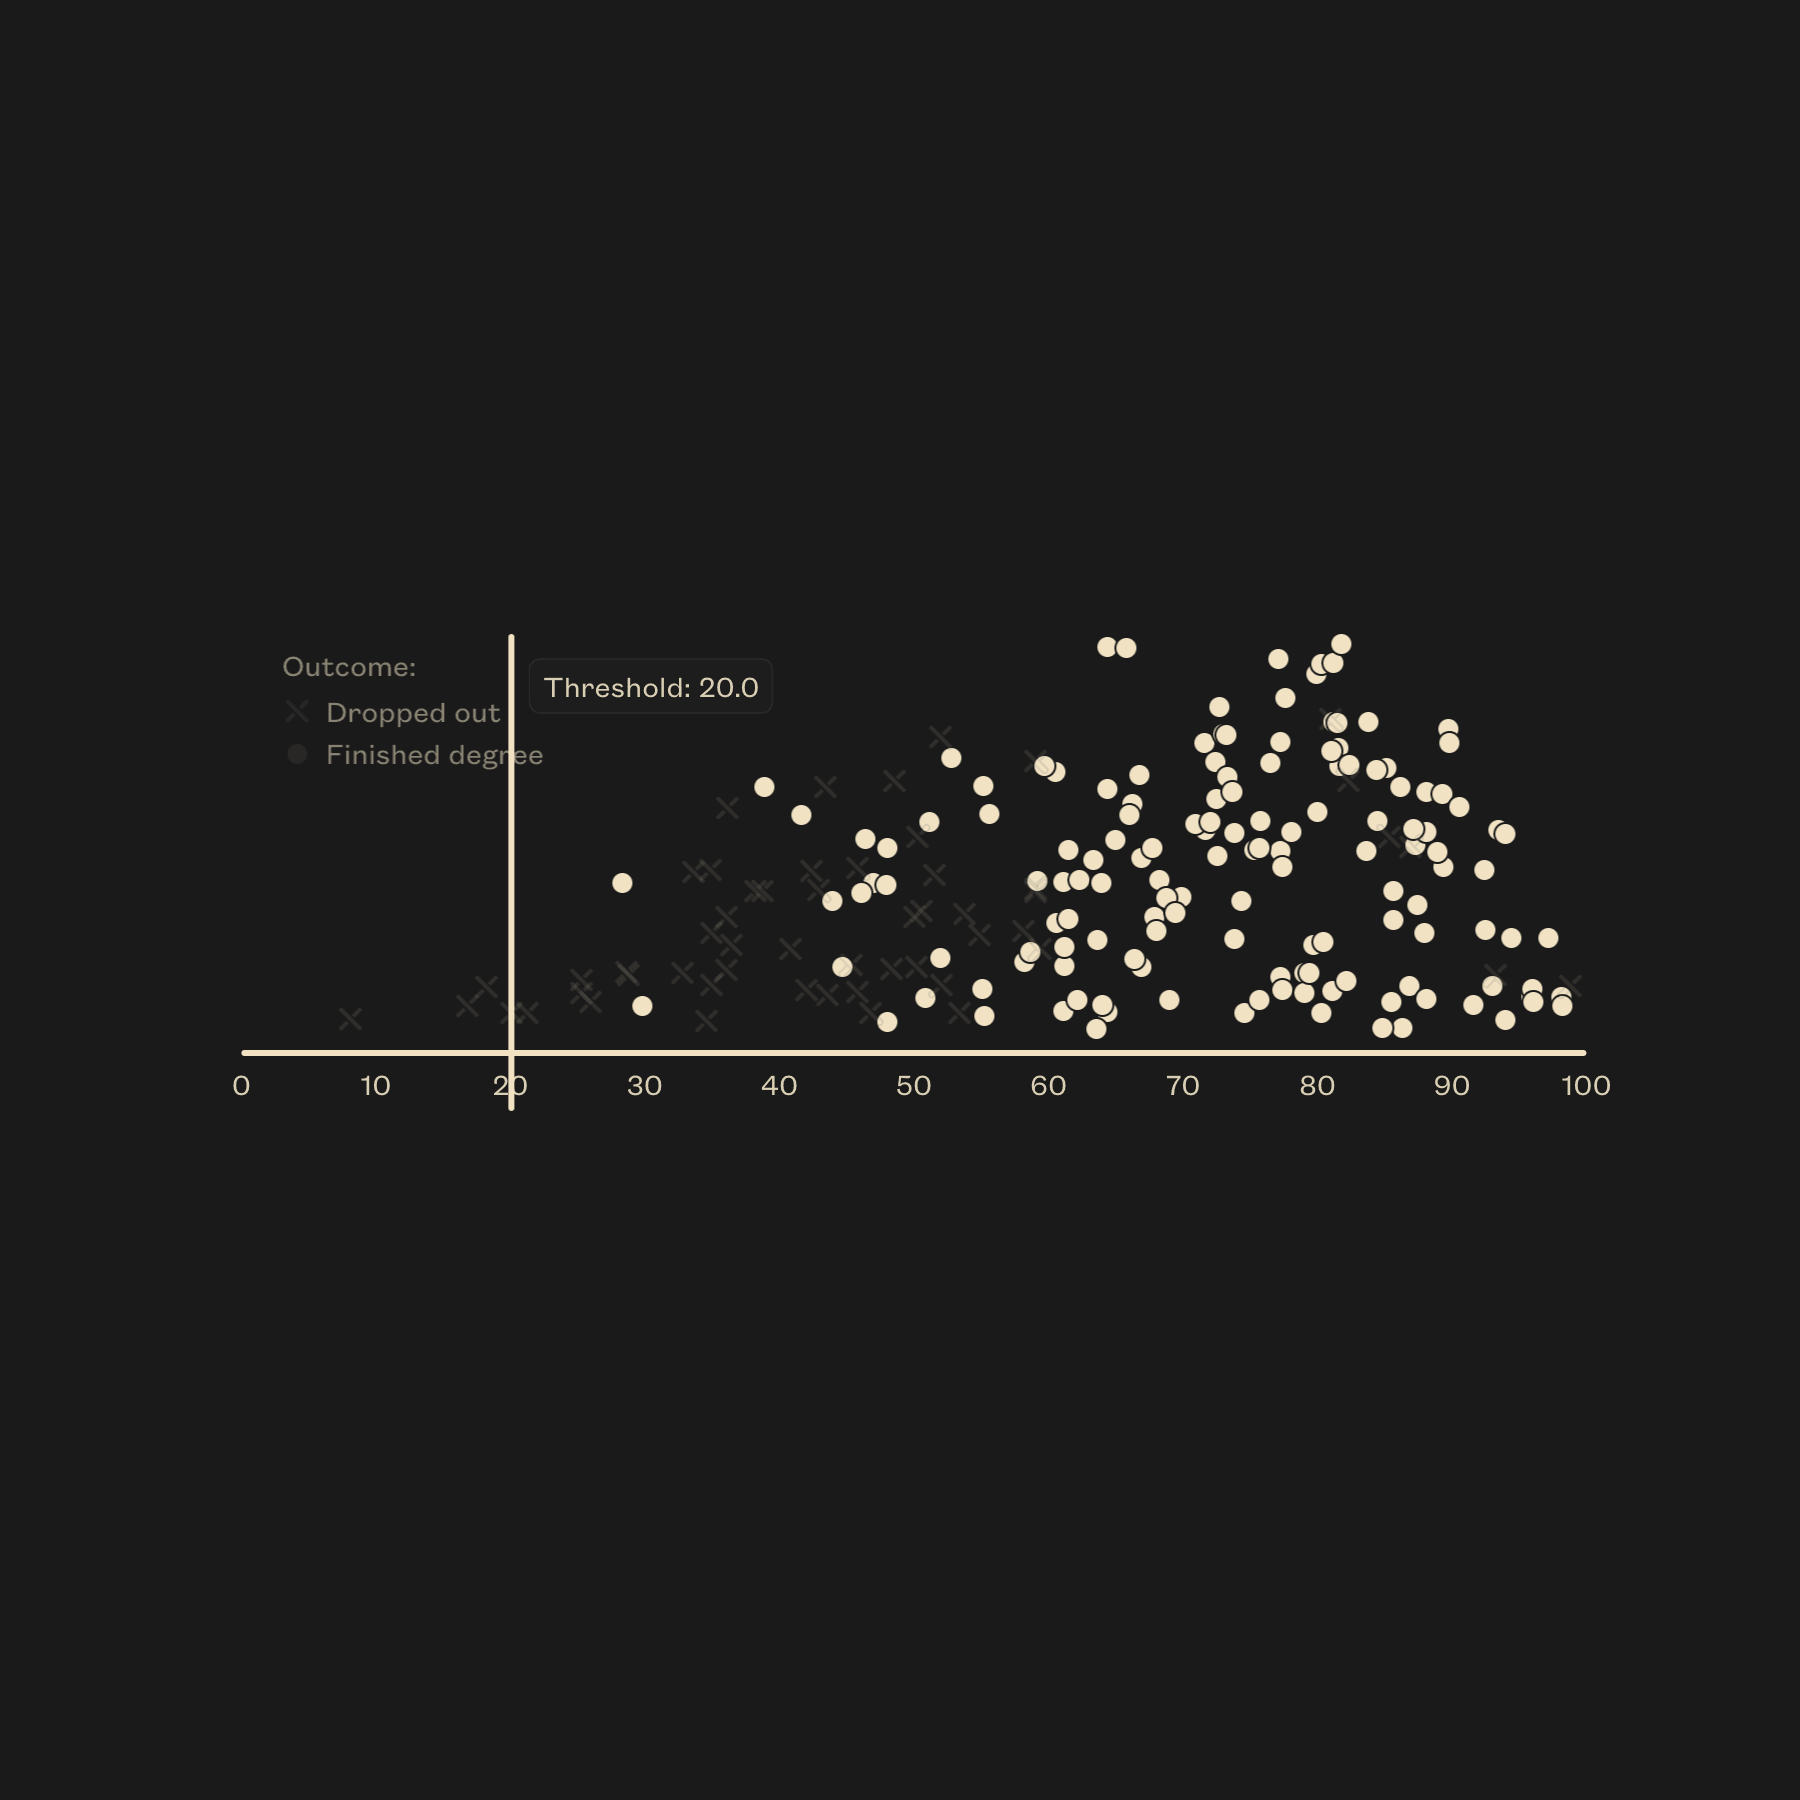 Scatter plot of whether students dropped out of college